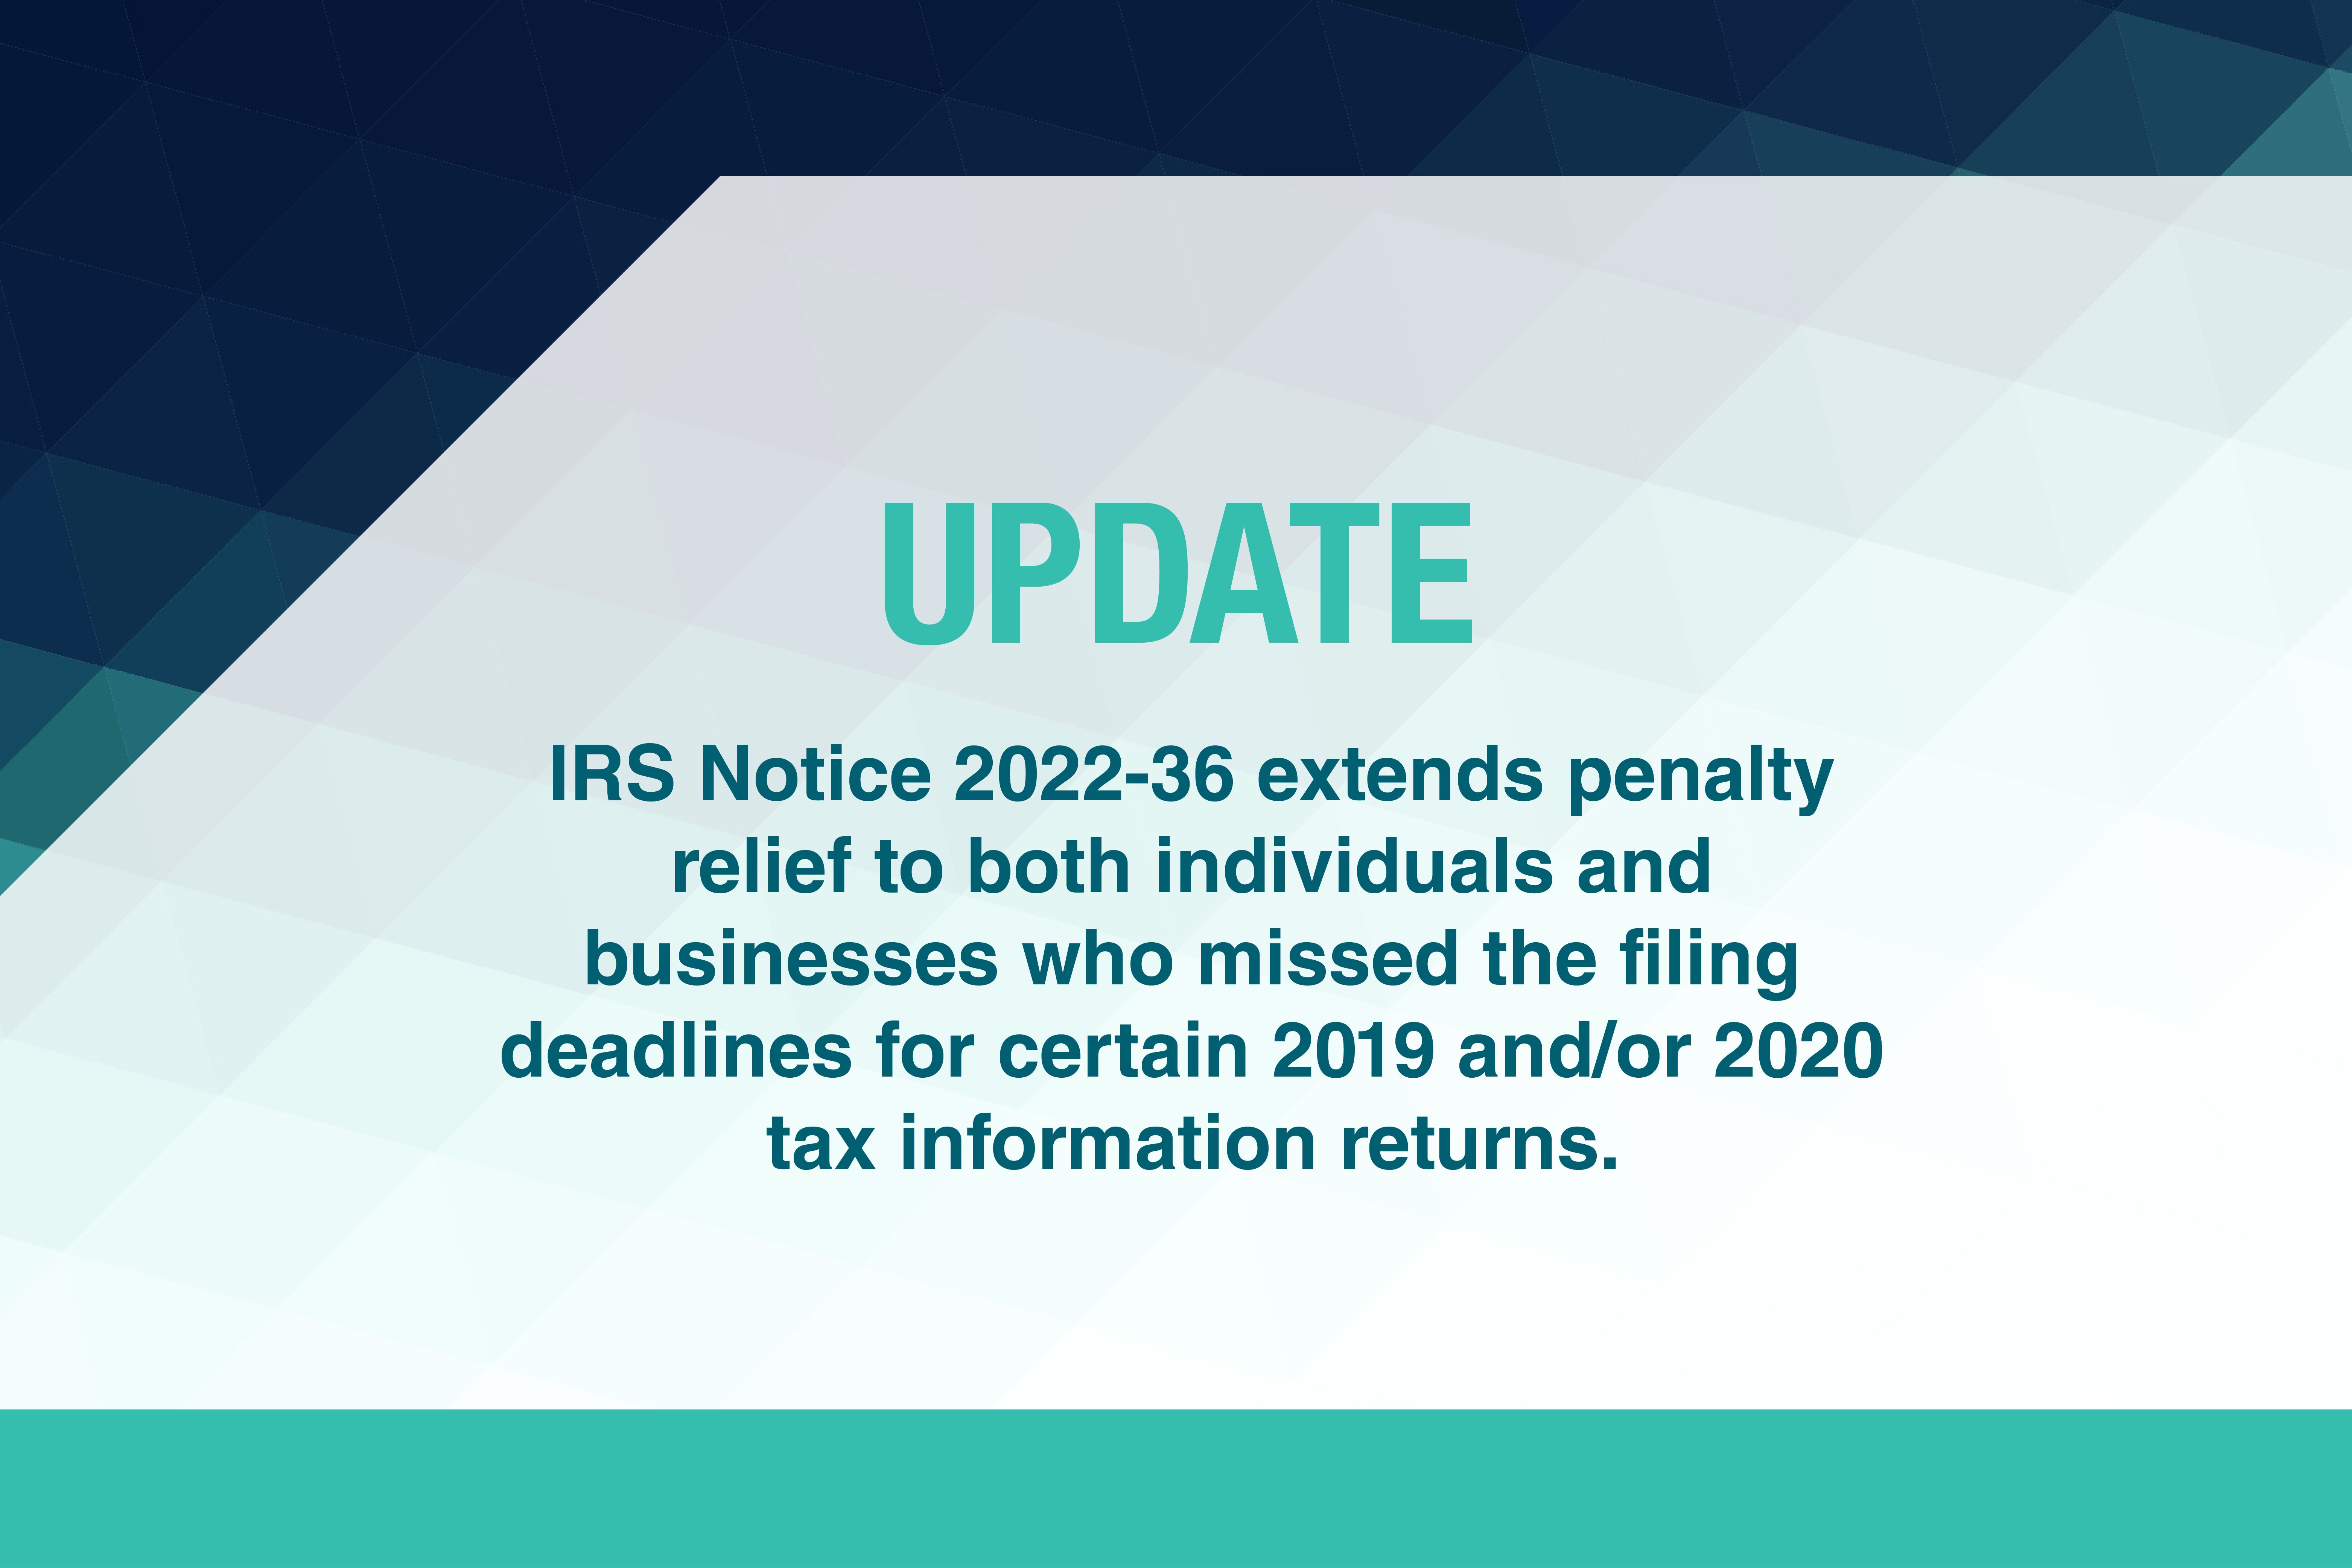 IRS offers penalty relief for 2019, 2020 tax years